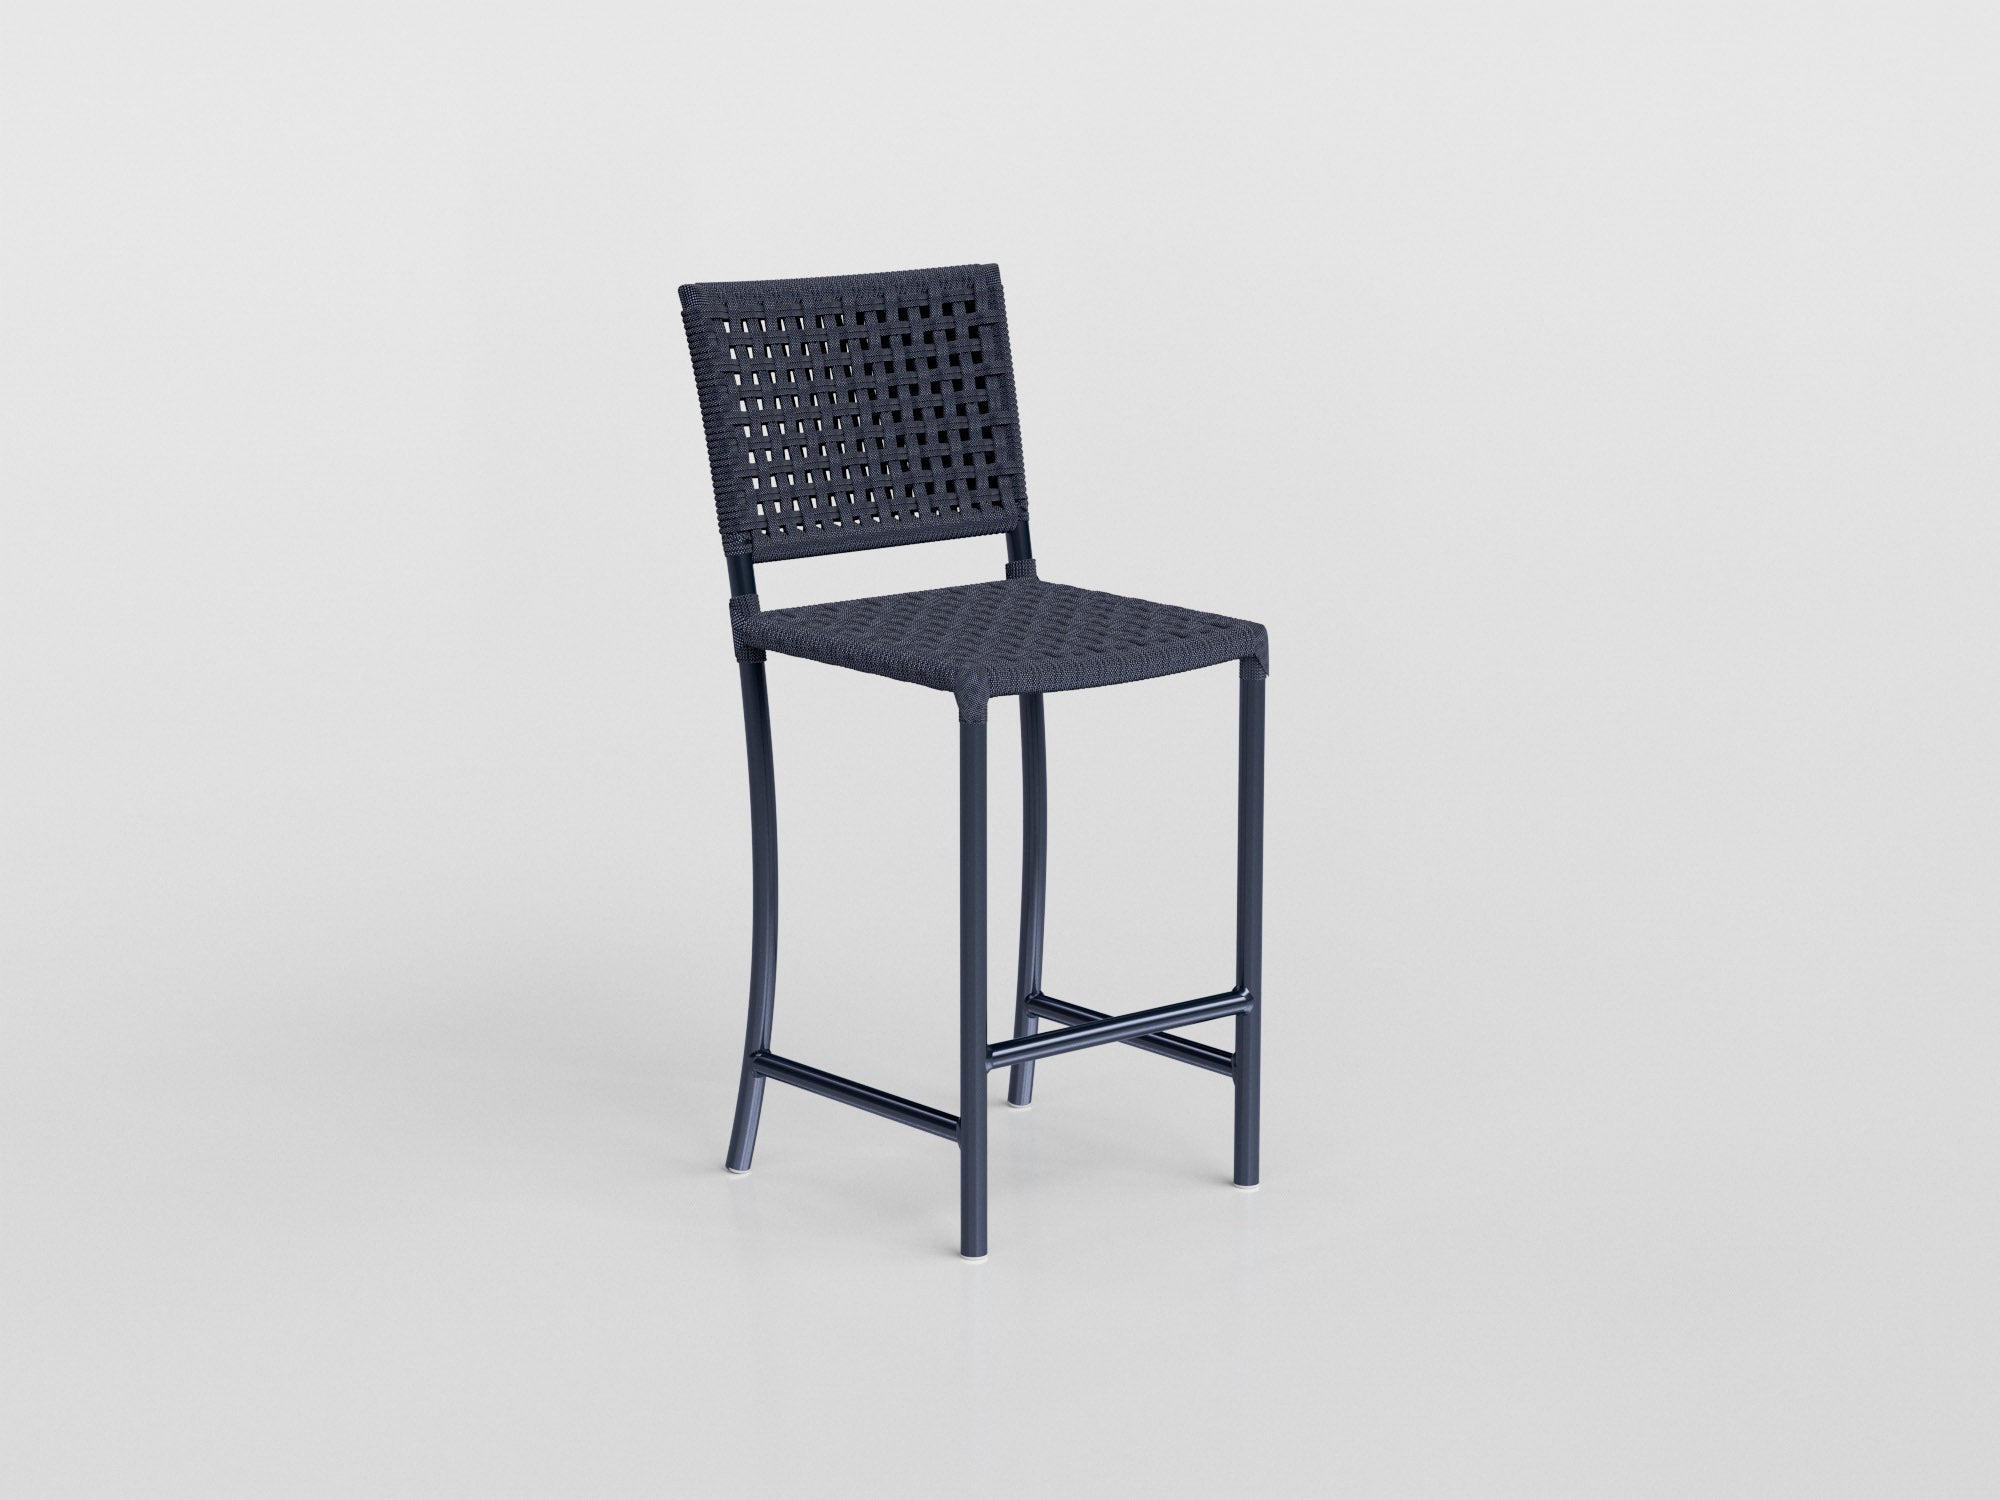 Giardino Counter Stool made of aluminium with braided nautical rope seat and back, designed by Luciano Mandelli